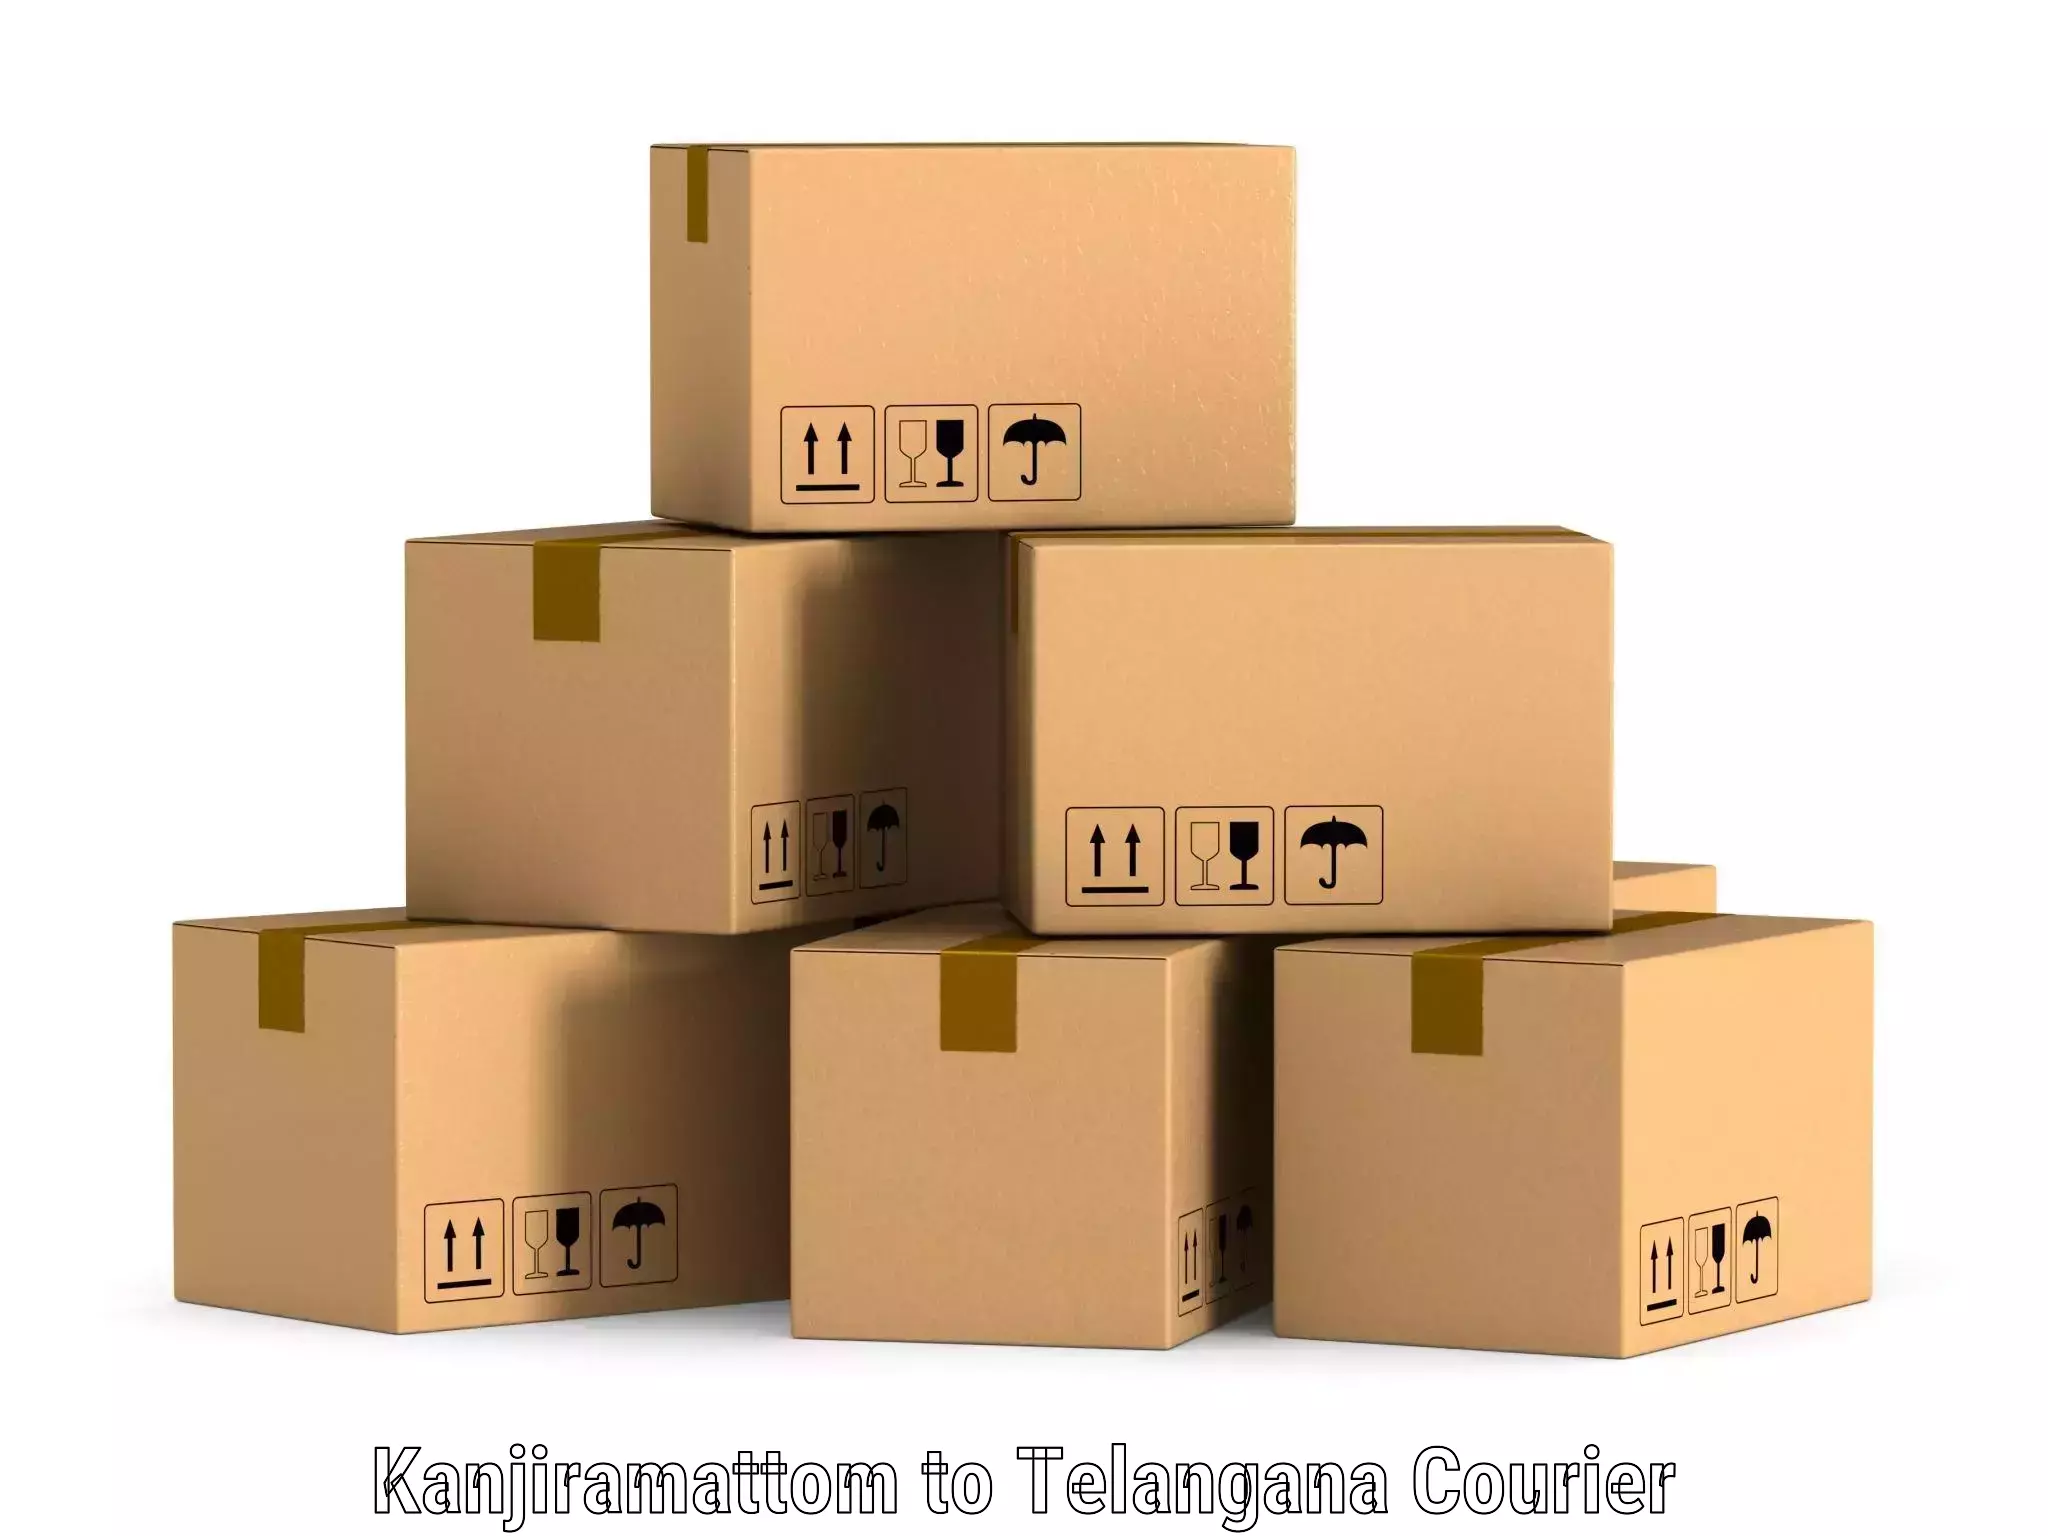 Subscription-based courier Kanjiramattom to Alair